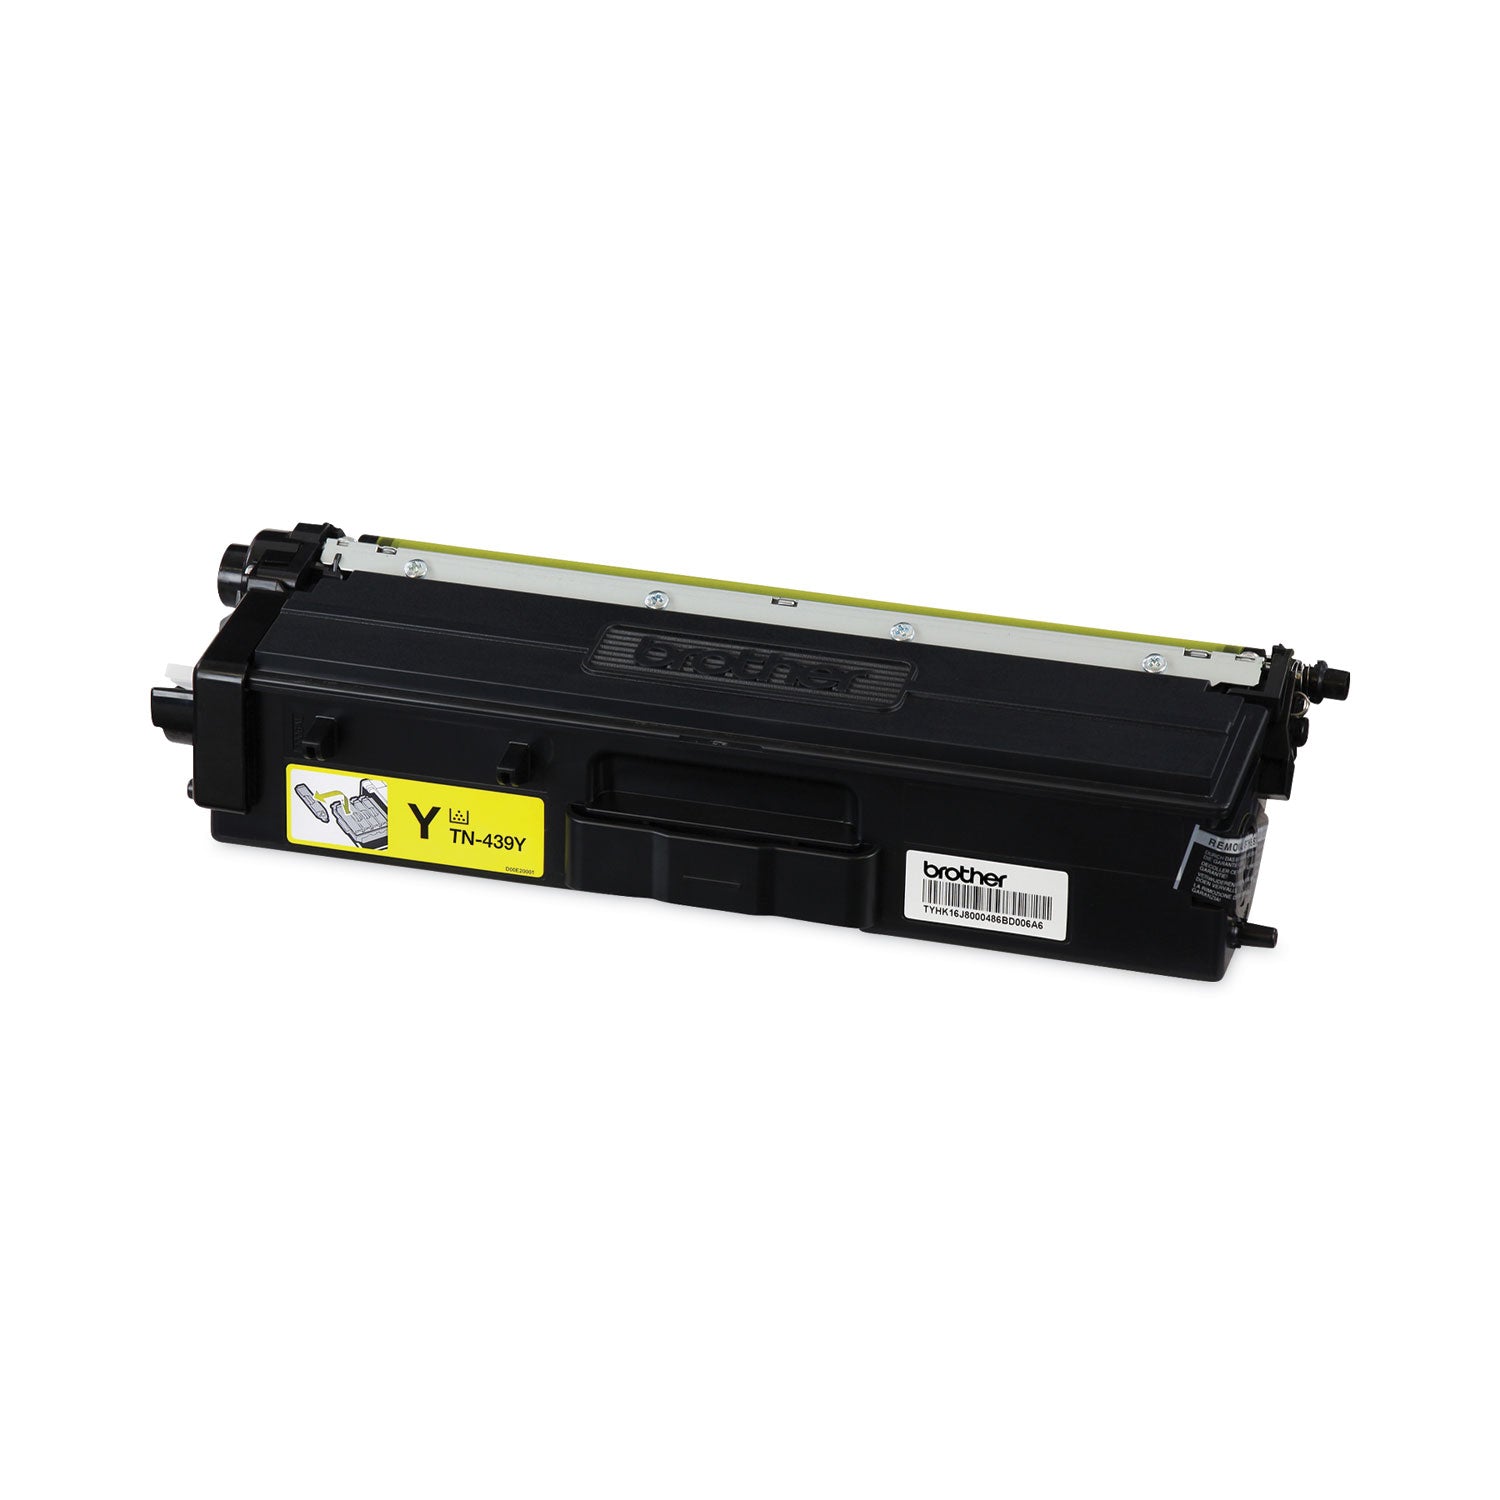 Brother TN439Y Original Ultra High Yield Laser Toner Cartridge - Yellow - 1 Each - 9000 Pages - 5